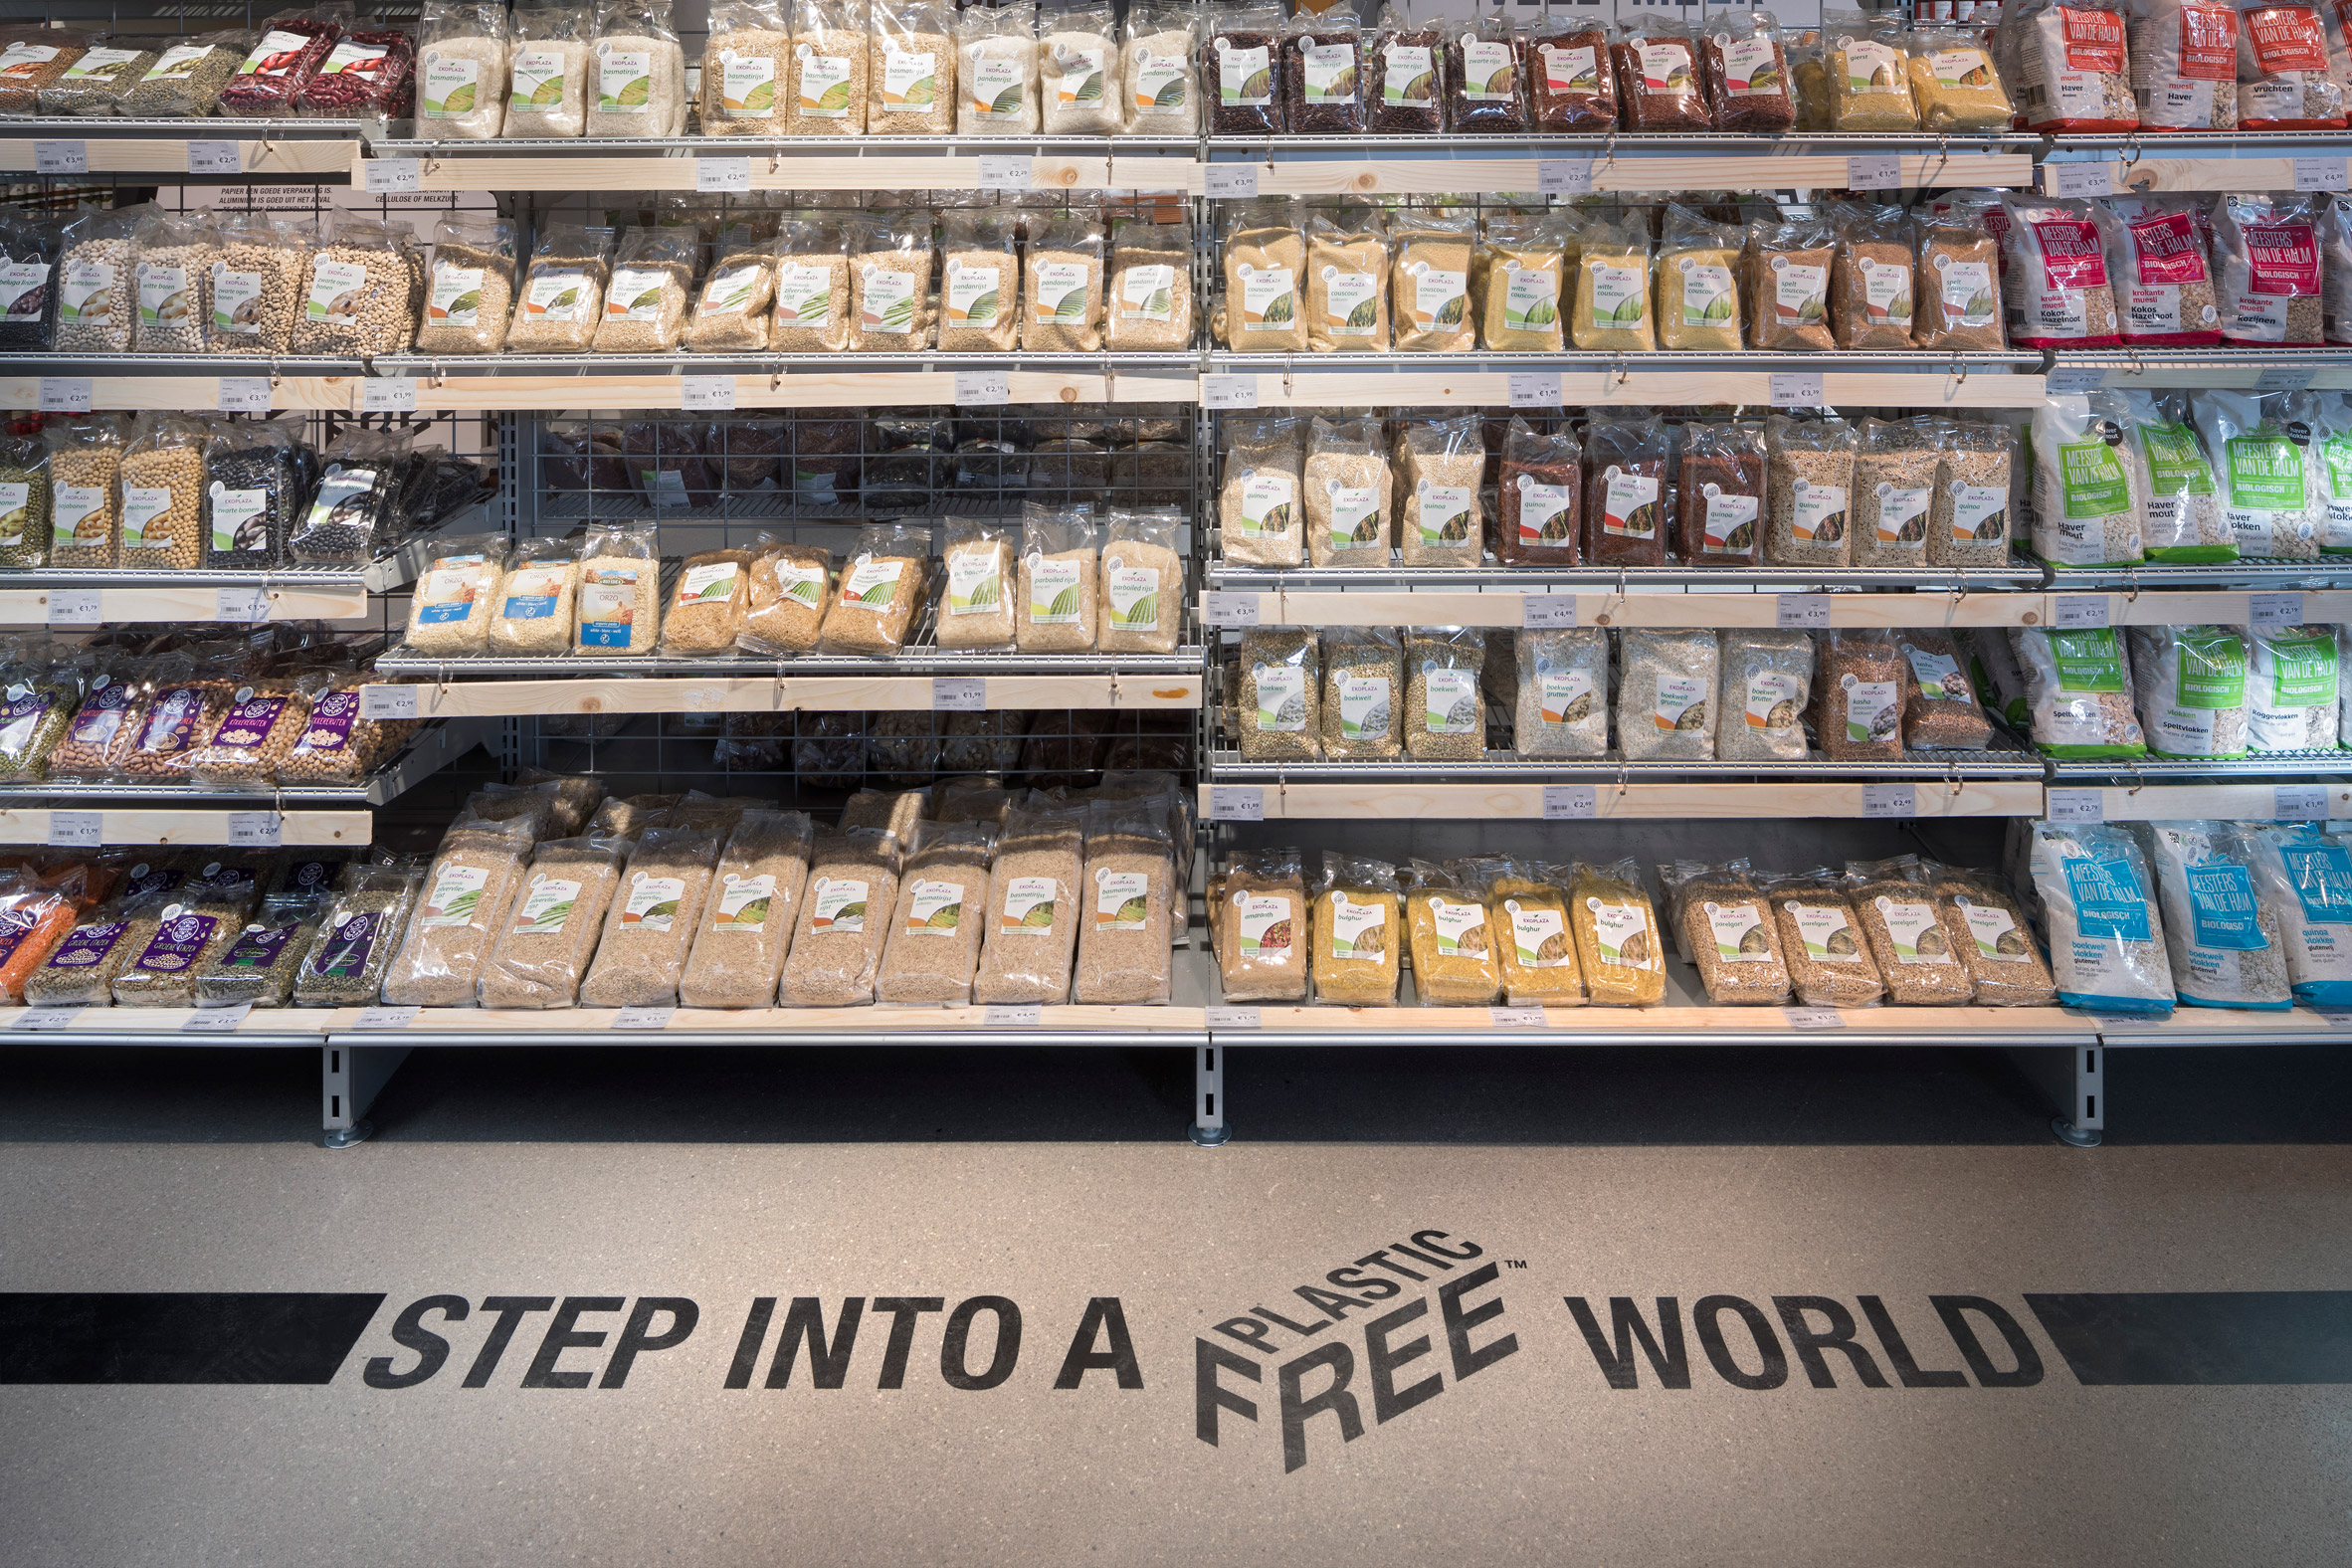 Made Thought creates visual identity for "world's first" plastic-free supermarket aisle